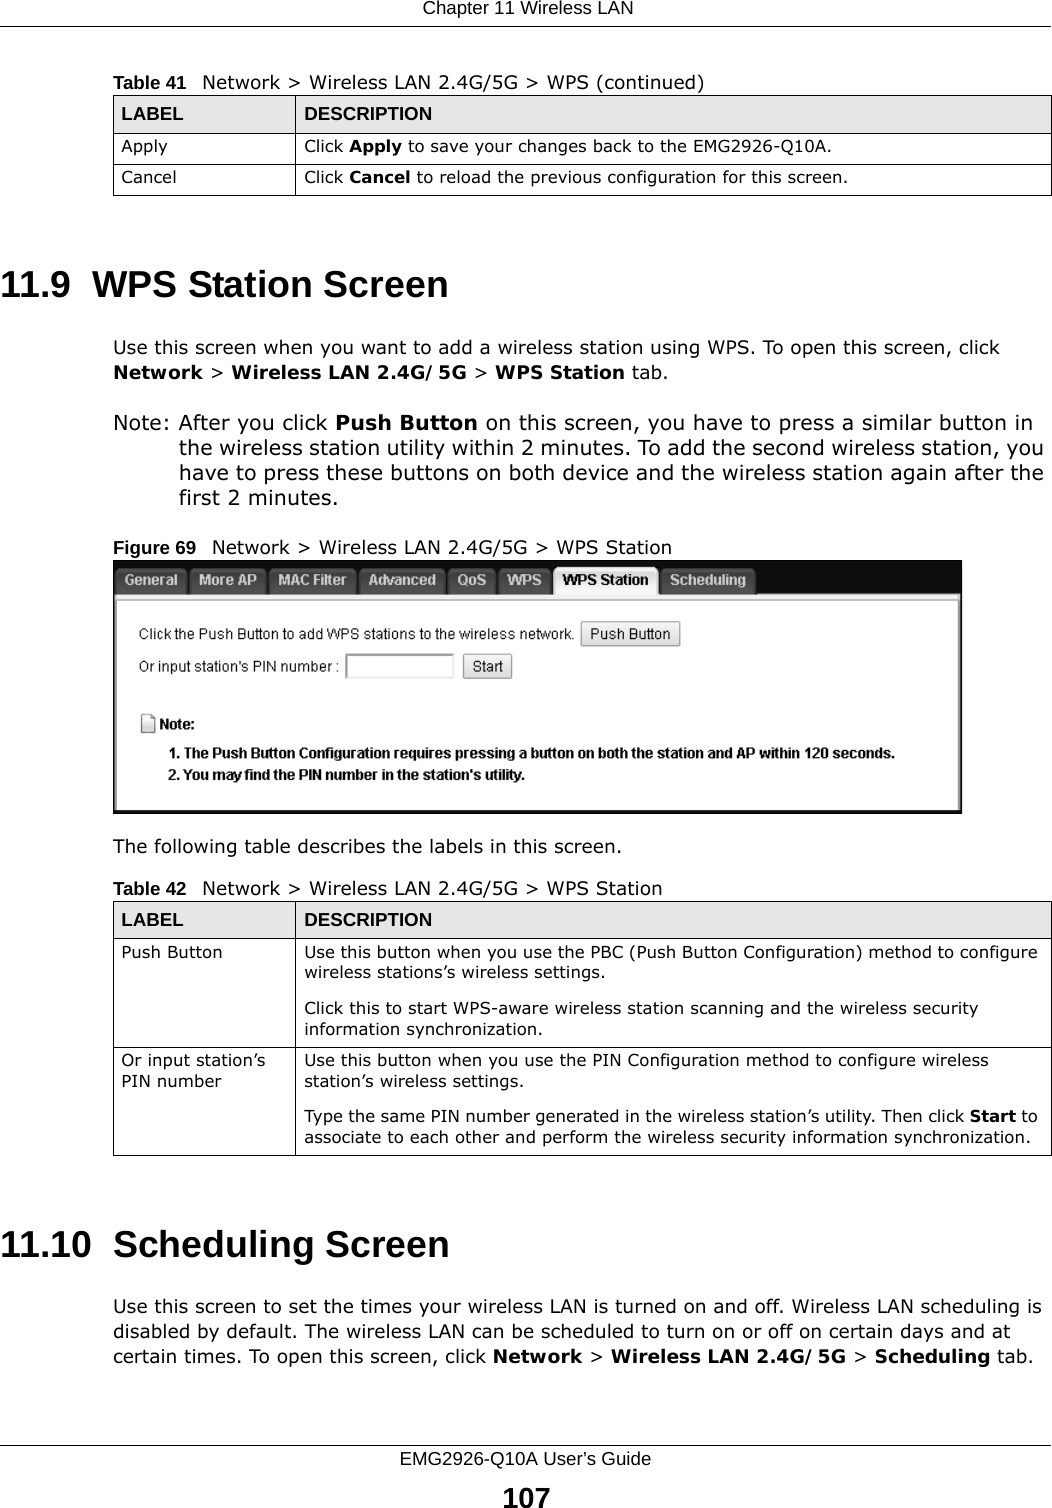  Chapter 11 Wireless LANEMG2926-Q10A User’s Guide10711.9  WPS Station ScreenUse this screen when you want to add a wireless station using WPS. To open this screen, click Network &gt; Wireless LAN 2.4G/5G &gt; WPS Station tab.Note: After you click Push Button on this screen, you have to press a similar button in the wireless station utility within 2 minutes. To add the second wireless station, you have to press these buttons on both device and the wireless station again after the first 2 minutes.Figure 69   Network &gt; Wireless LAN 2.4G/5G &gt; WPS StationThe following table describes the labels in this screen.11.10  Scheduling ScreenUse this screen to set the times your wireless LAN is turned on and off. Wireless LAN scheduling is disabled by default. The wireless LAN can be scheduled to turn on or off on certain days and at certain times. To open this screen, click Network &gt; Wireless LAN 2.4G/5G &gt; Scheduling tab.Apply Click Apply to save your changes back to the EMG2926-Q10A.Cancel Click Cancel to reload the previous configuration for this screen.Table 41   Network &gt; Wireless LAN 2.4G/5G &gt; WPS (continued)LABEL DESCRIPTIONTable 42   Network &gt; Wireless LAN 2.4G/5G &gt; WPS StationLABEL DESCRIPTIONPush Button Use this button when you use the PBC (Push Button Configuration) method to configure wireless stations’s wireless settings. Click this to start WPS-aware wireless station scanning and the wireless security information synchronization. Or input station’s PIN numberUse this button when you use the PIN Configuration method to configure wireless station’s wireless settings. Type the same PIN number generated in the wireless station’s utility. Then click Start to associate to each other and perform the wireless security information synchronization. 